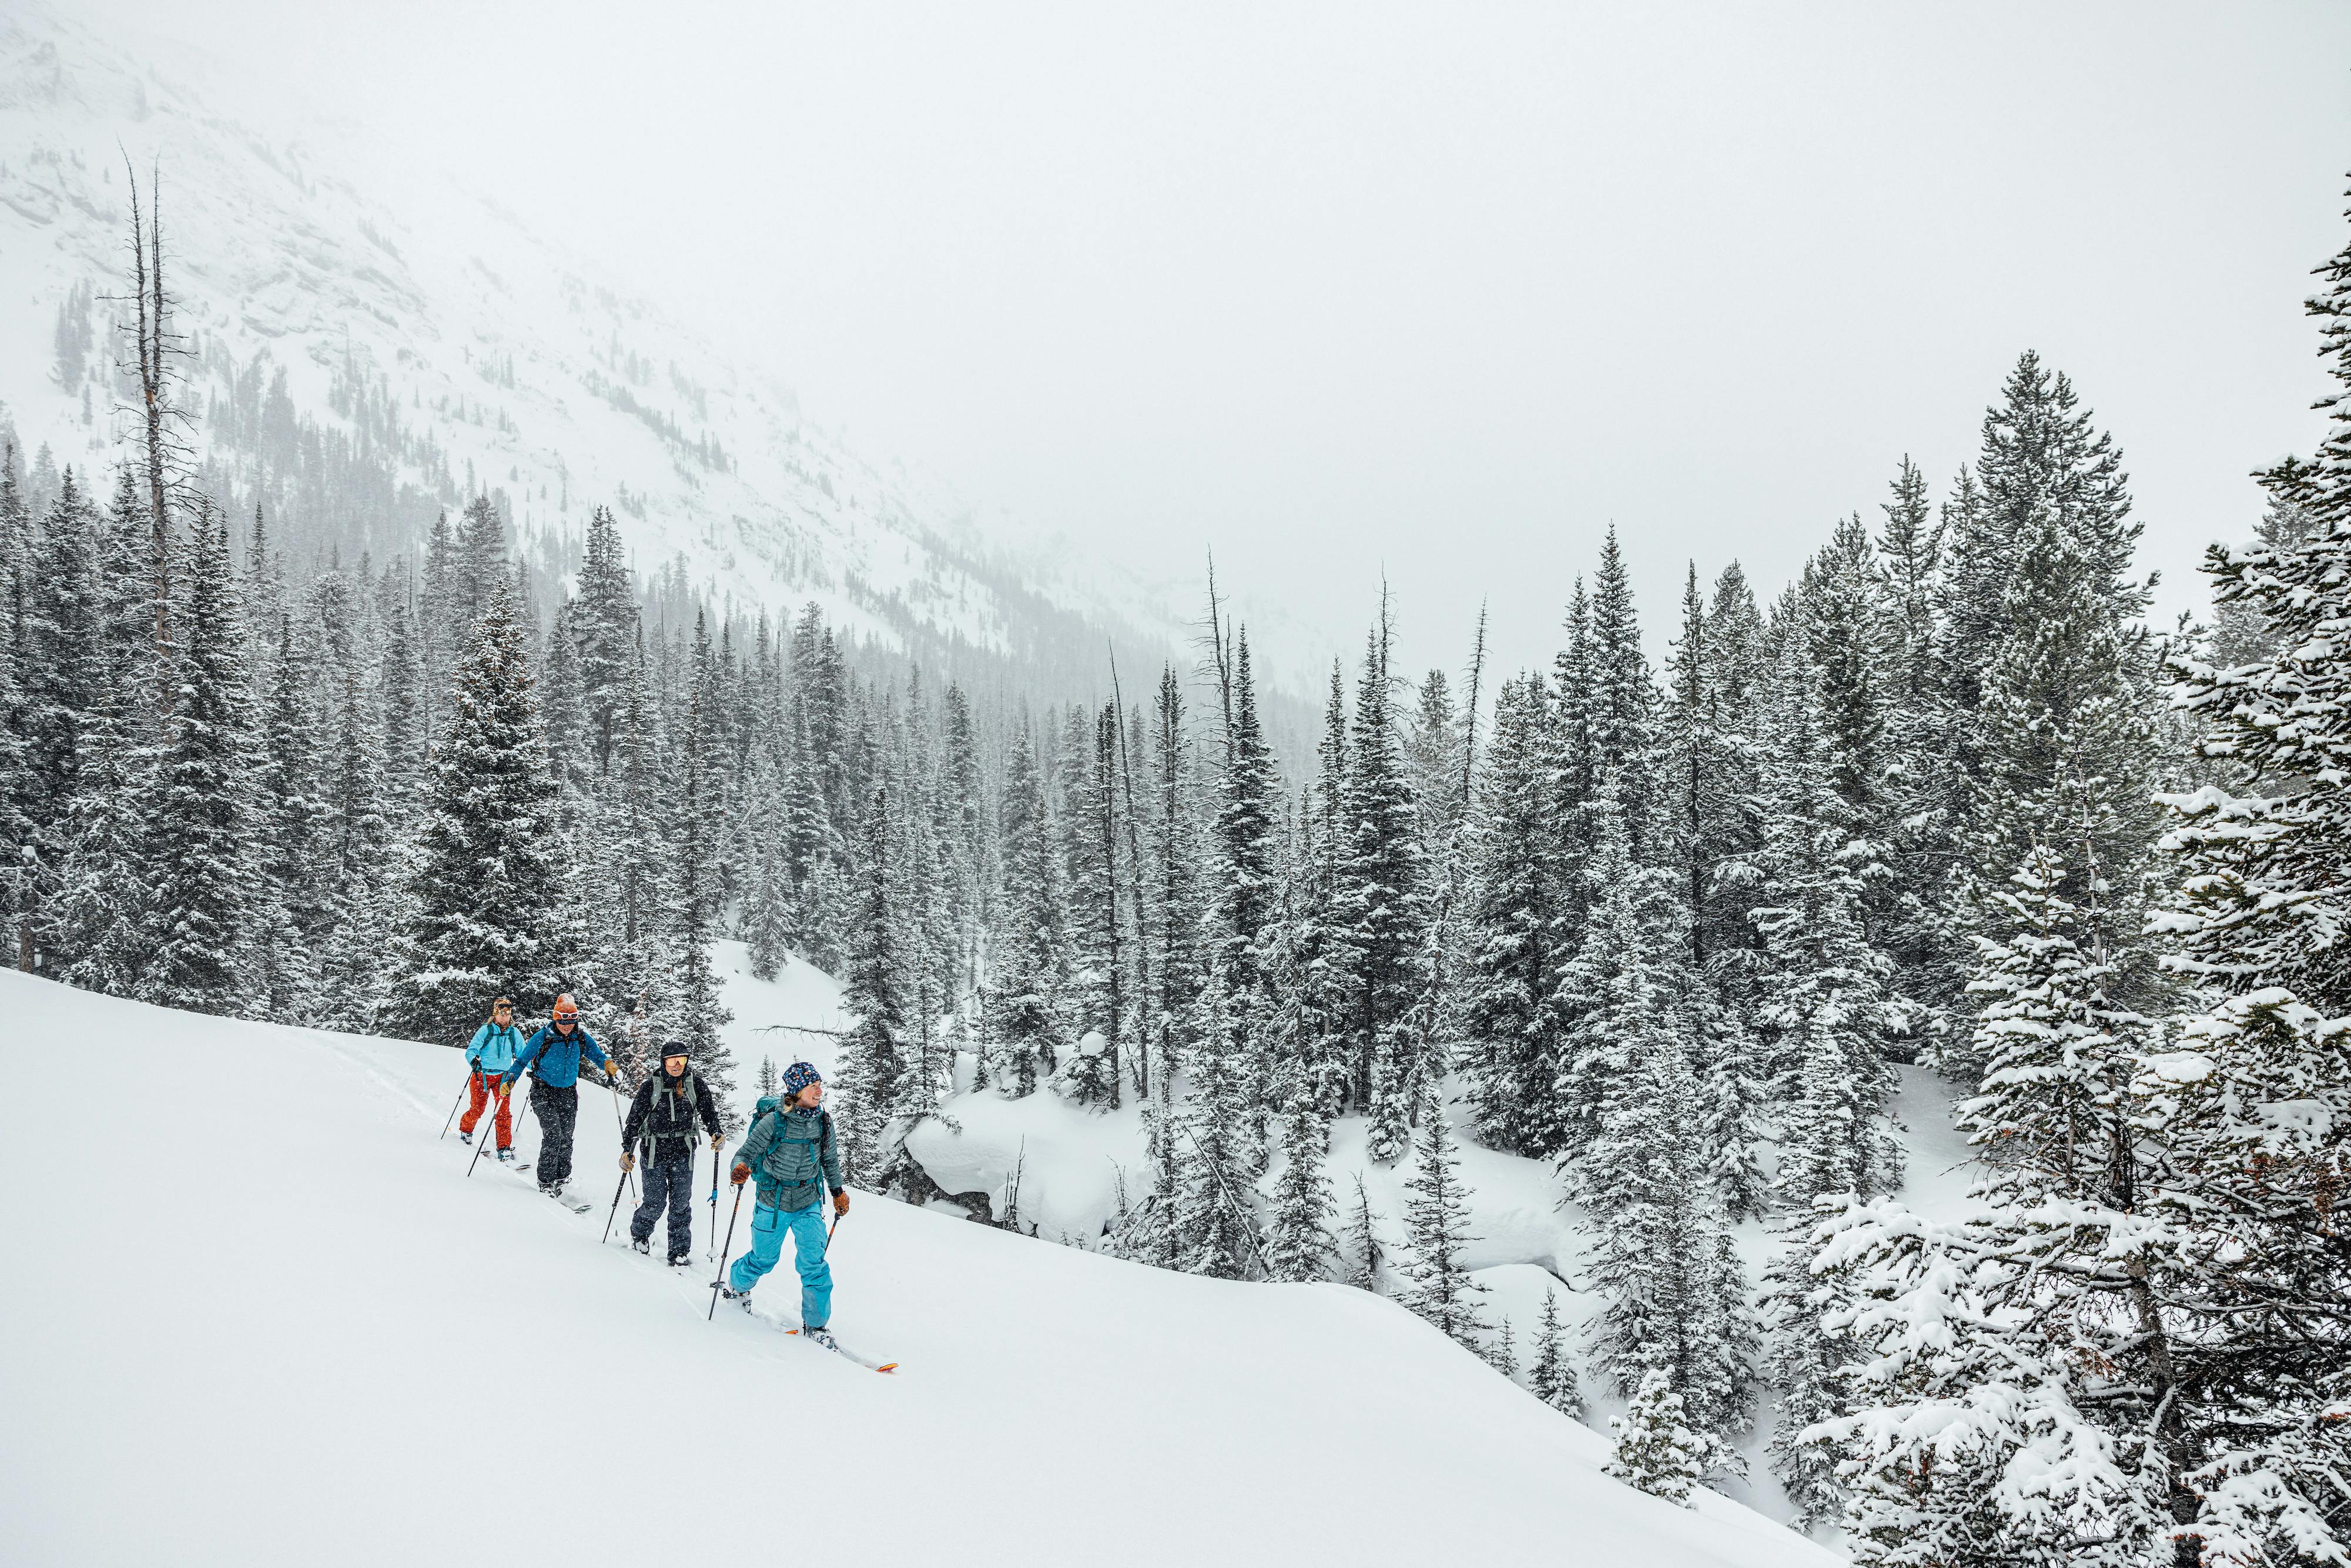 Skiers touring across a snowy mountain landscape in Cooke City.